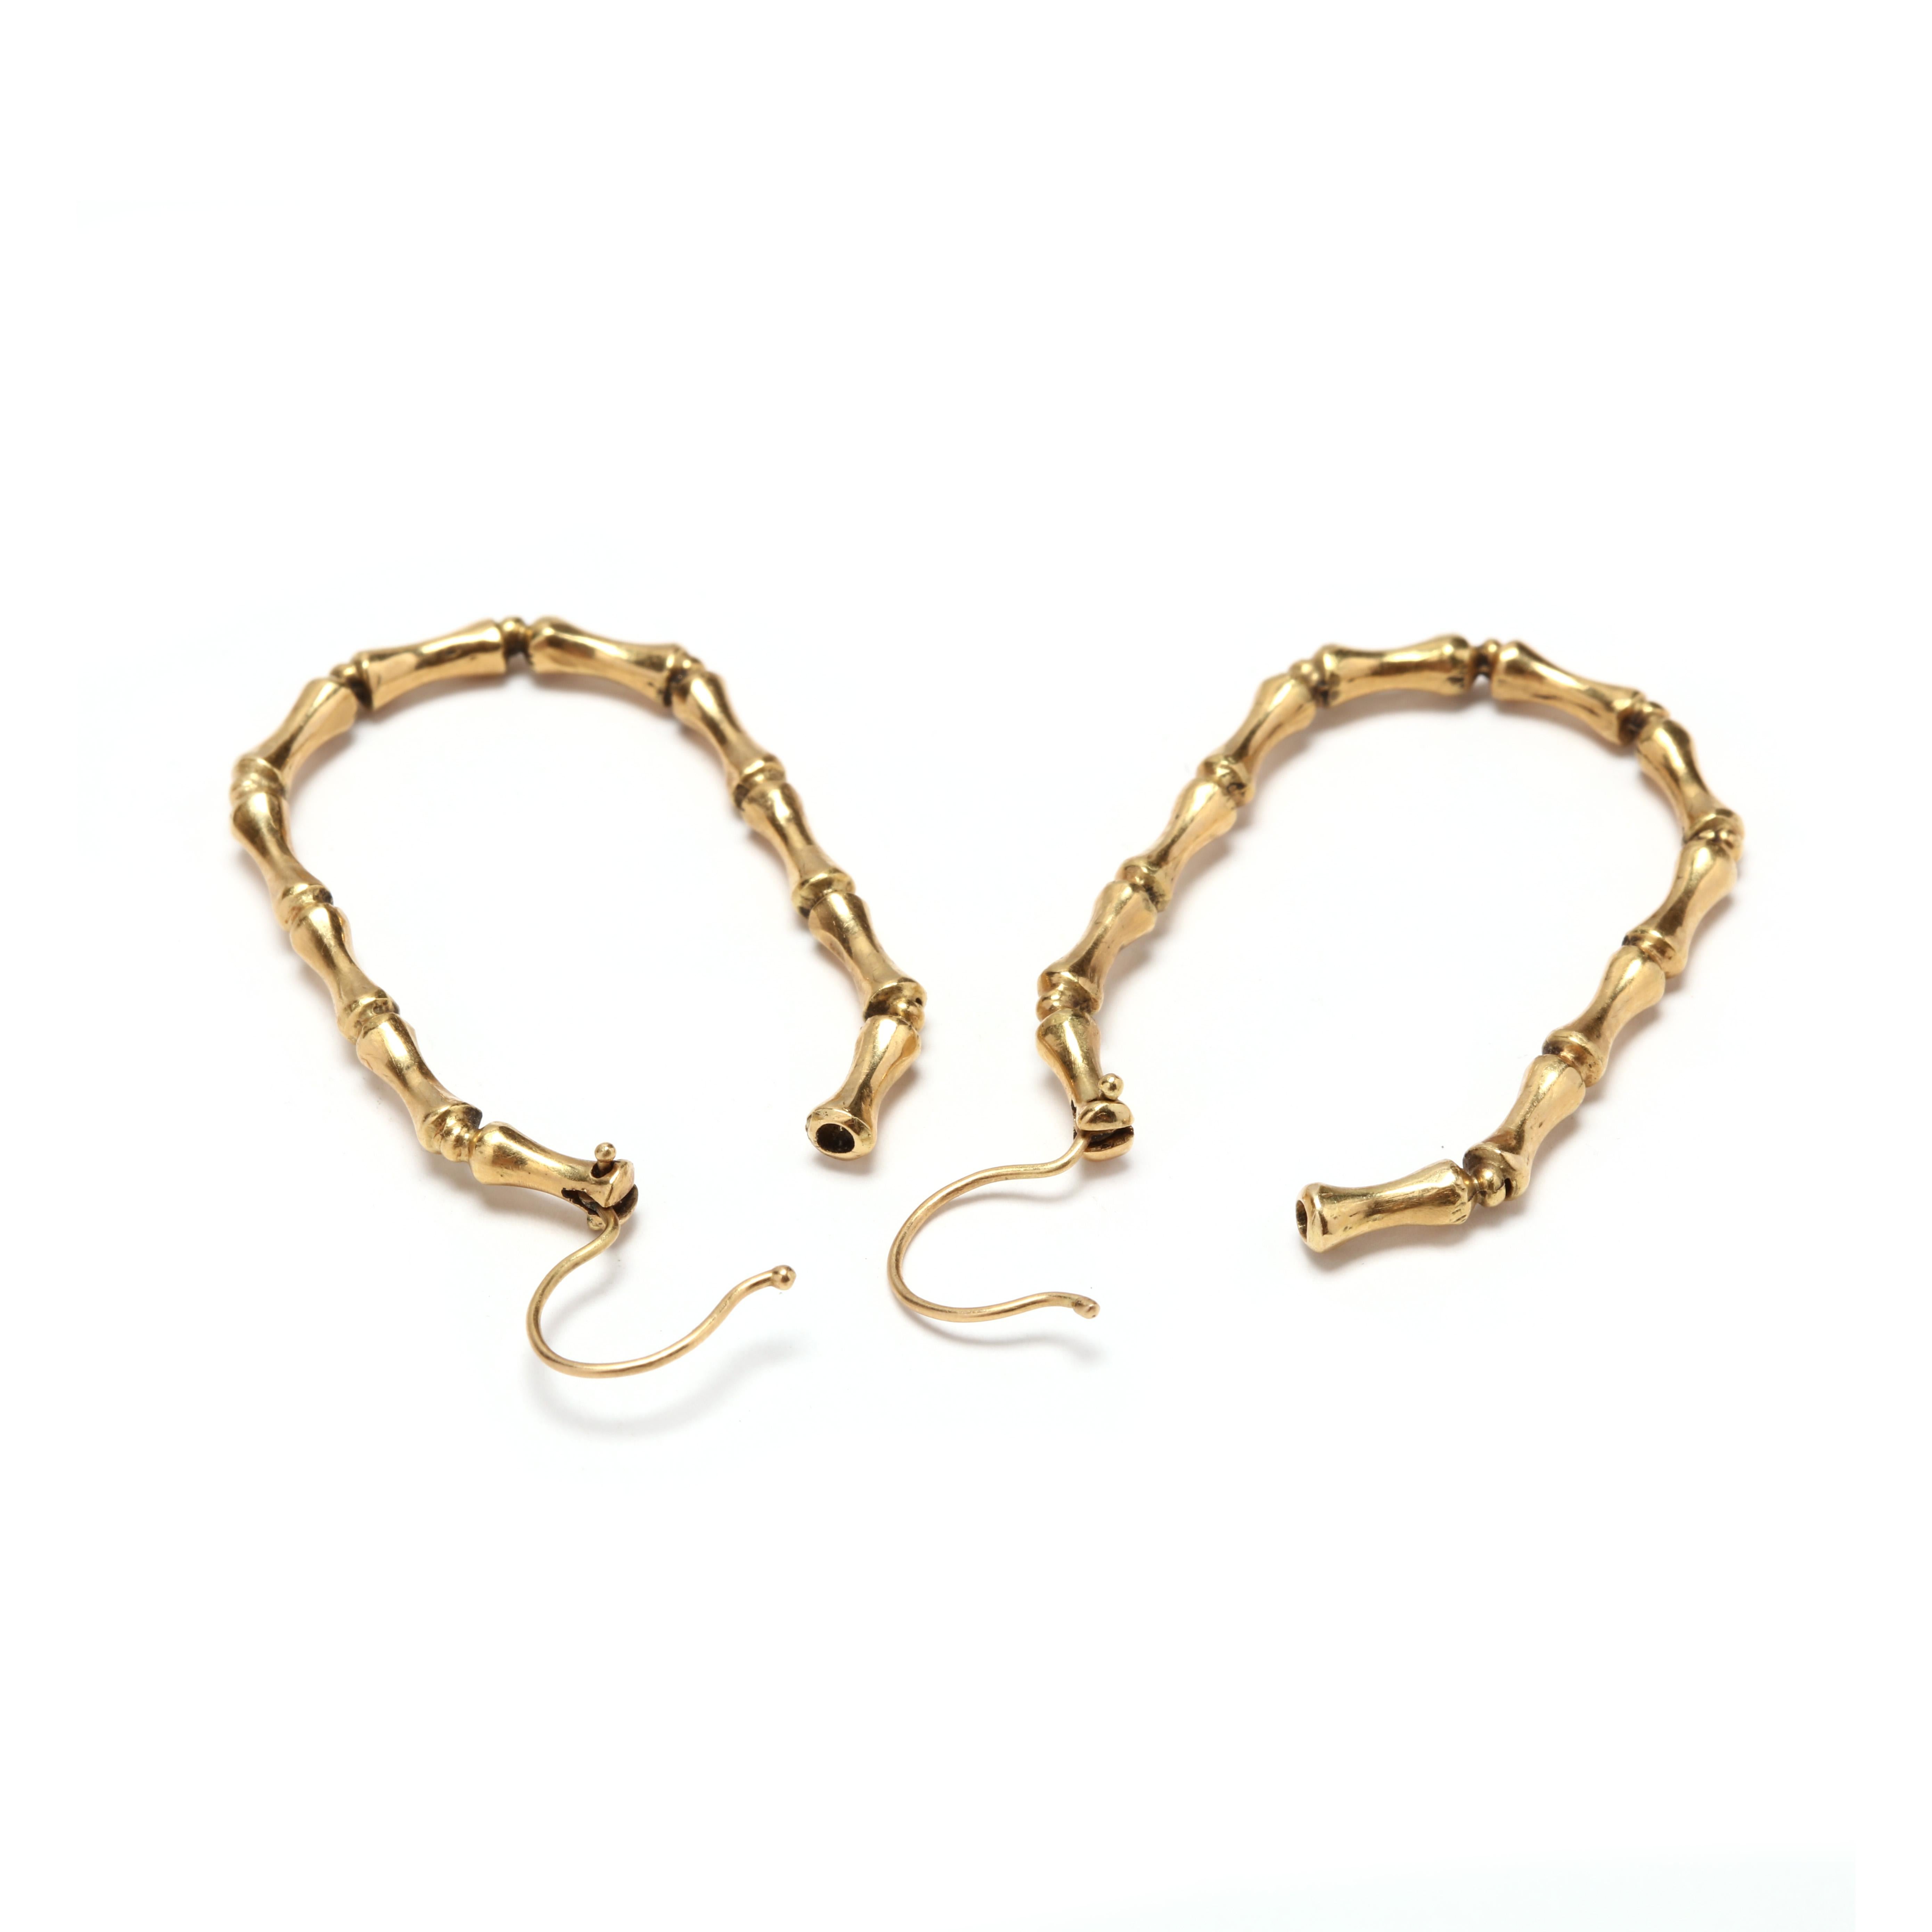 A pair of vintage 18 karat yellow gold bamboo hoop earrings. In an oval design with a bamboo motif.

Length 7/8 in.

Height 1.75 in.

Width 3 mm

6.68 dwts

* Please note that this is a vintage item and may show signs of wear. It has been